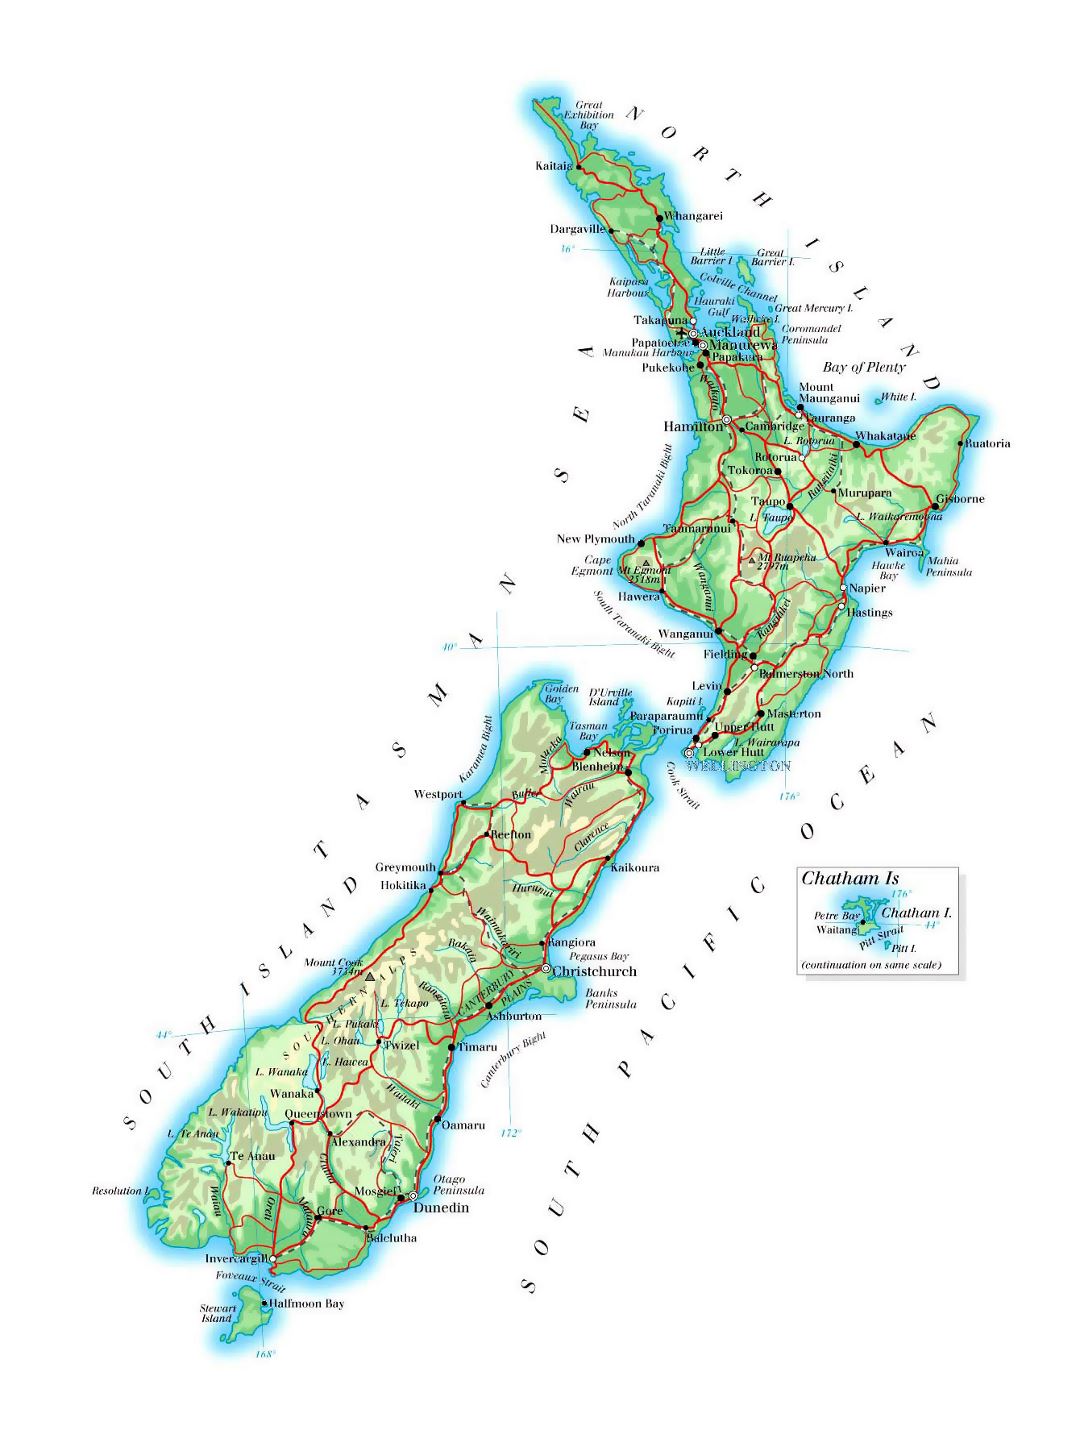 Large elevation map of New Zealand with roads, railroads, cities and airports